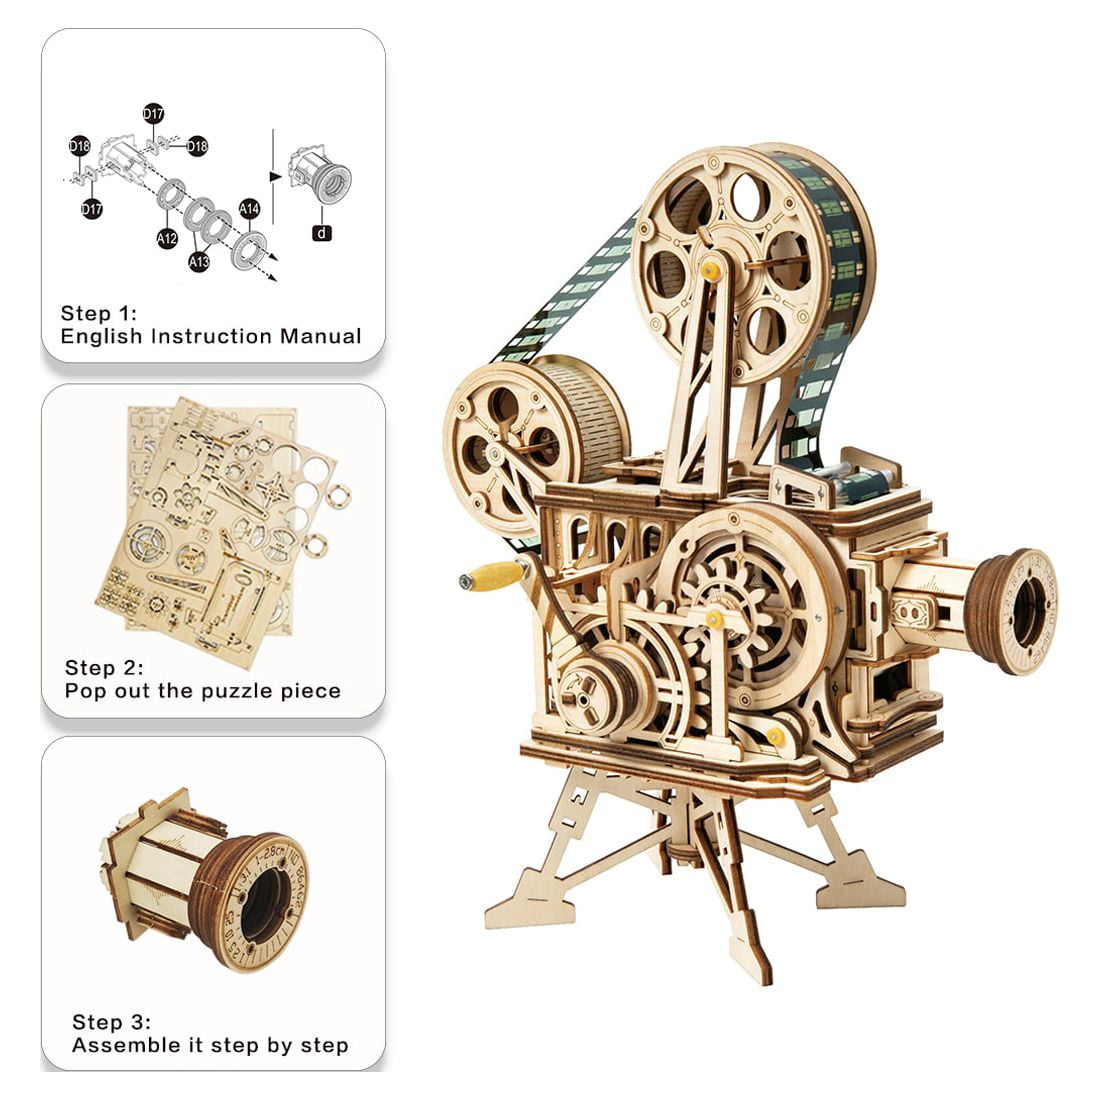  ROKR 3D Puzzle LK602 for Adults, Classic Printing Press Wooden  Puzzles Model Building Kits, DIY Wood Crafts Cool Toys for Kids Birthday  Gifts,Collage Aesthetic, Art Hobbies for Men Women : Toys